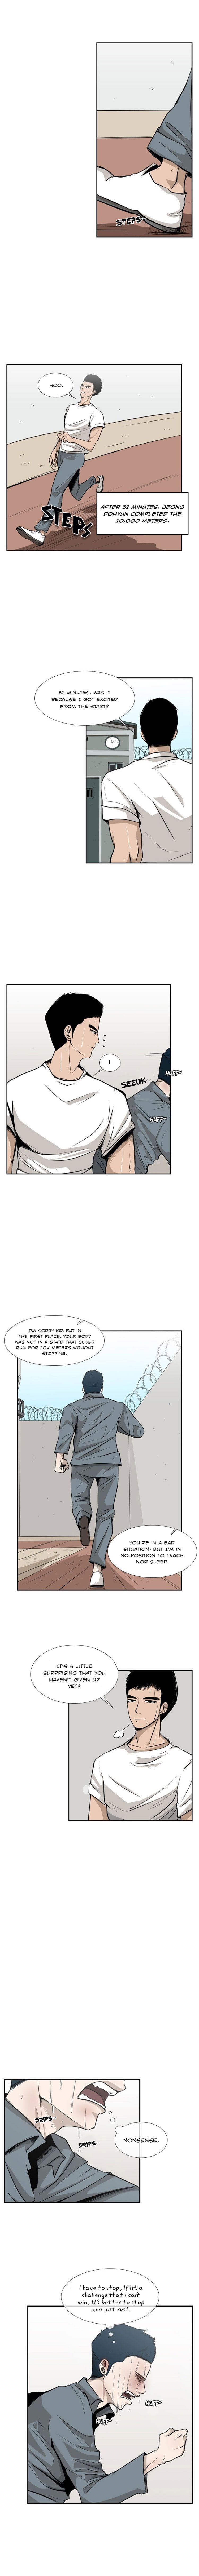 Shark Chapter 10 page 8